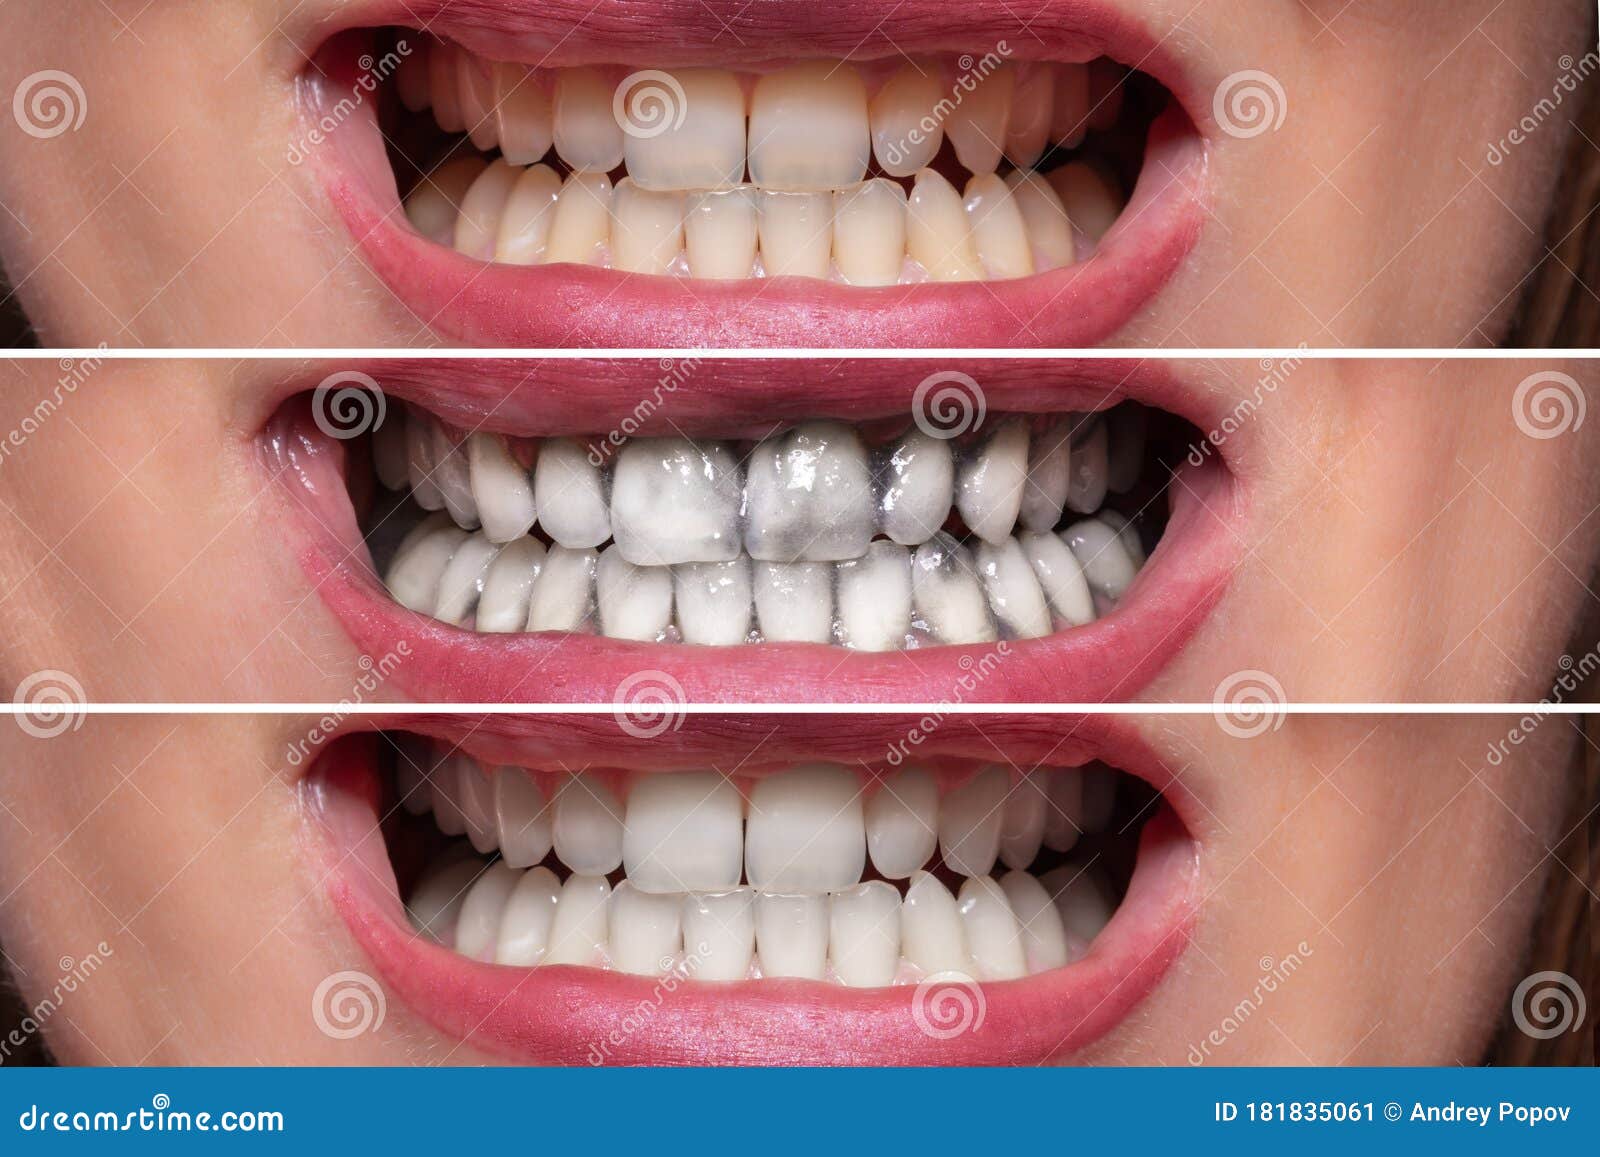 person teeth before and after cleaning